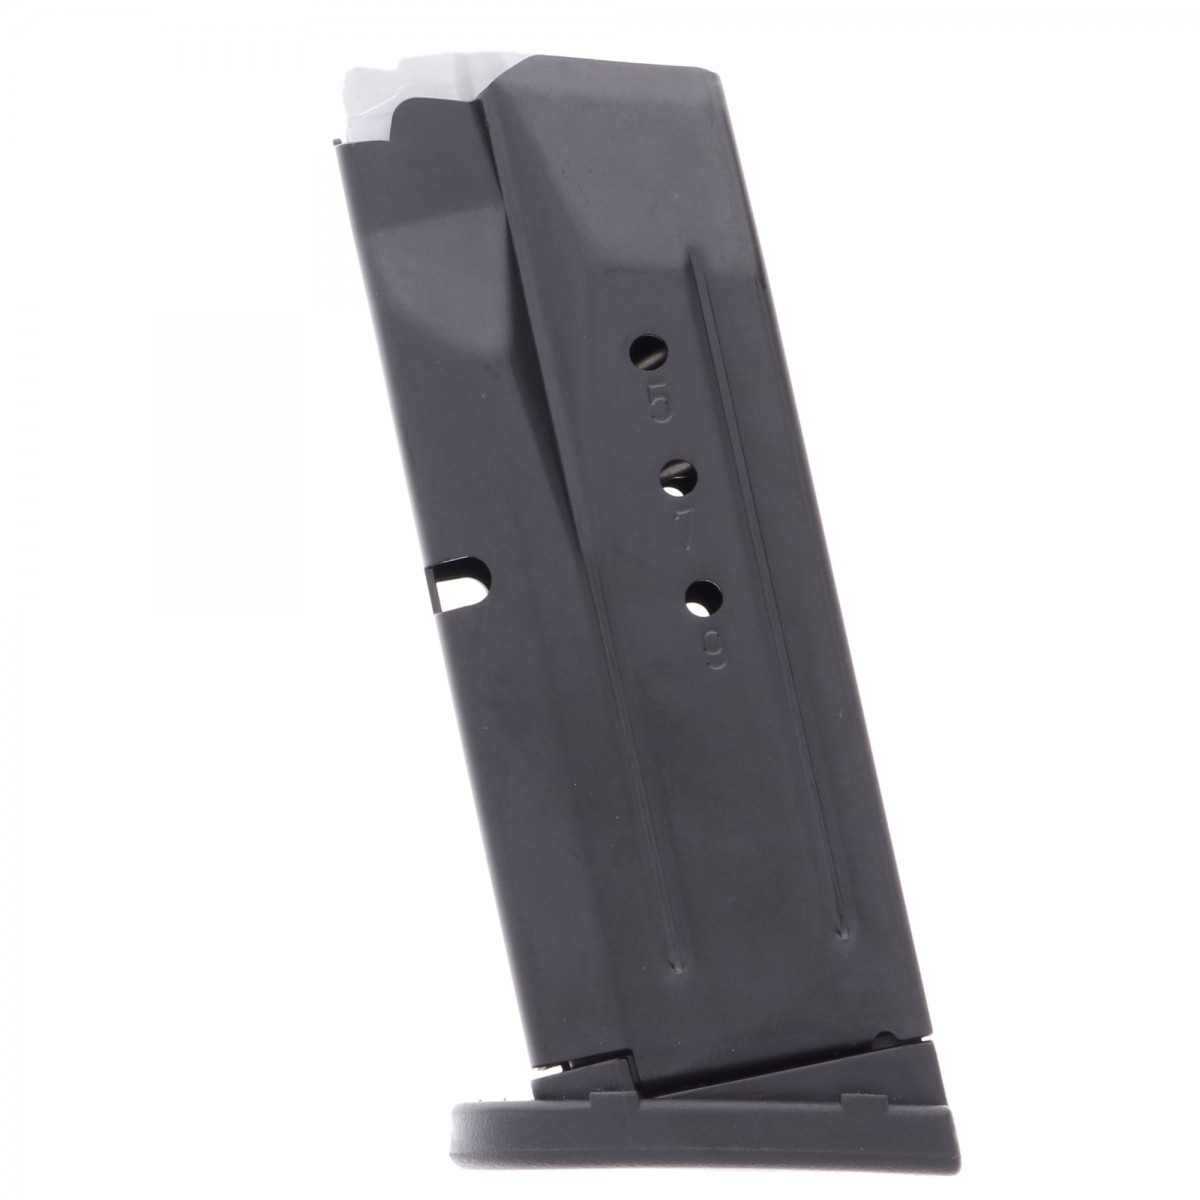 smith and wesson ez 9mm extended magazine